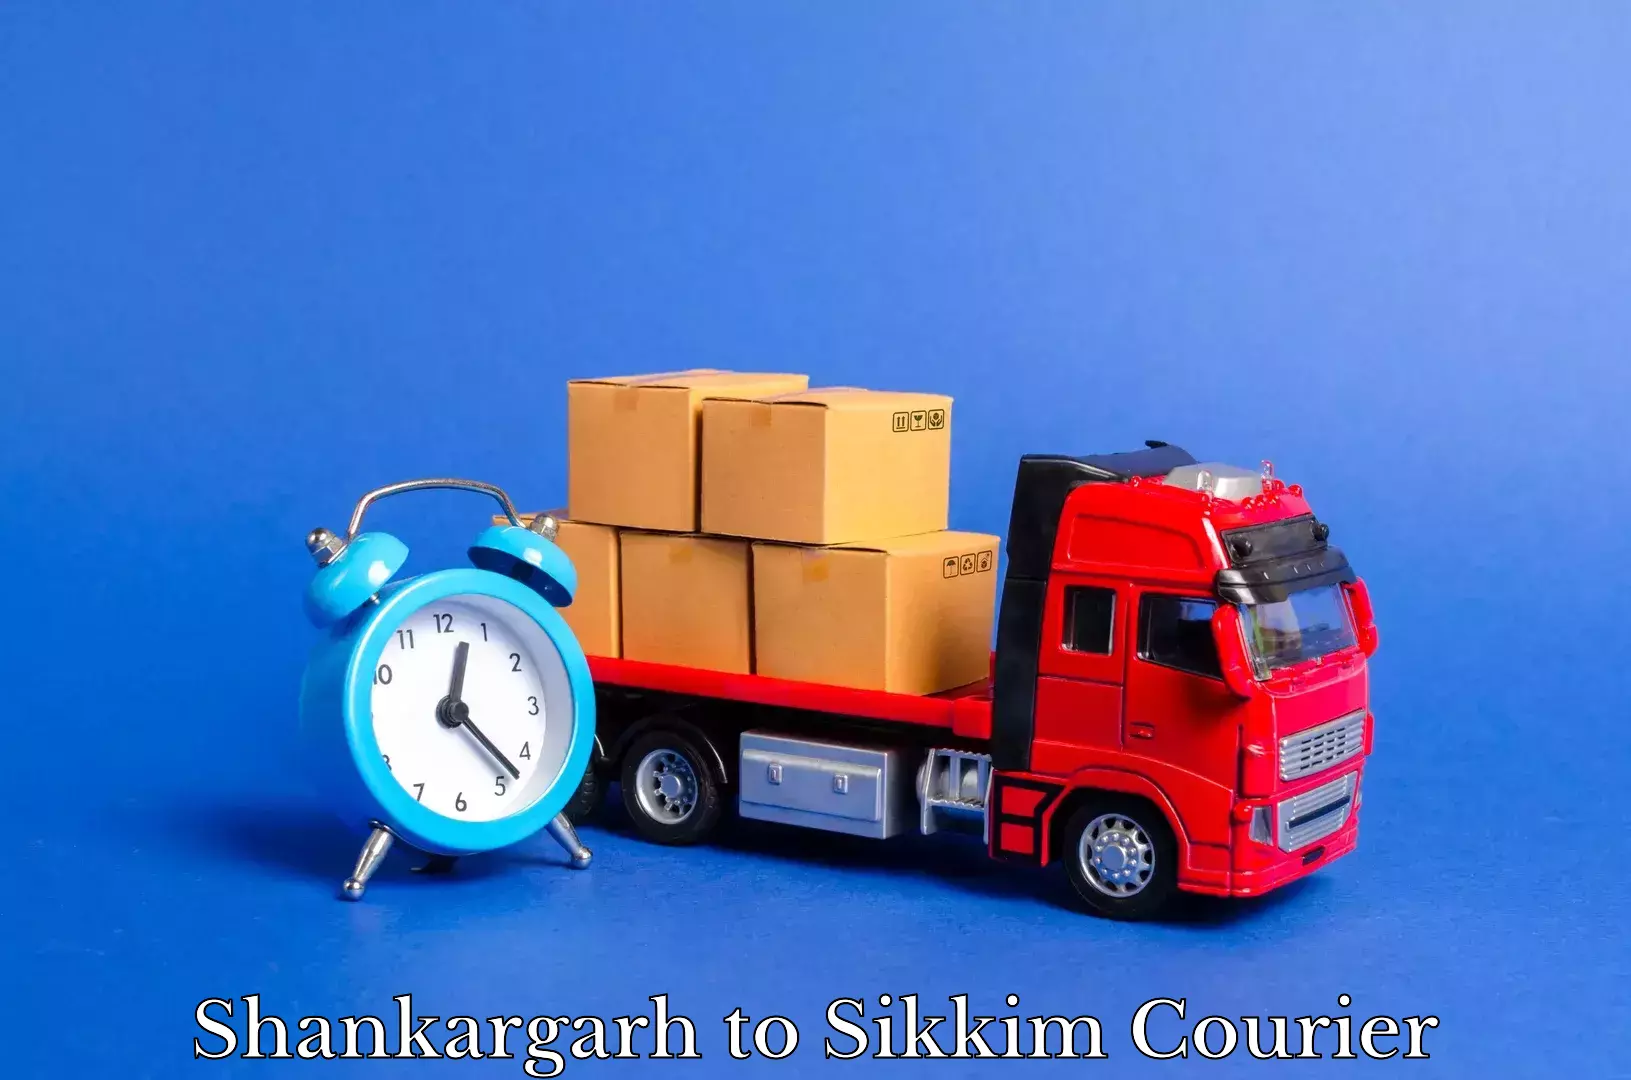 Reliable relocation services Shankargarh to Gangtok